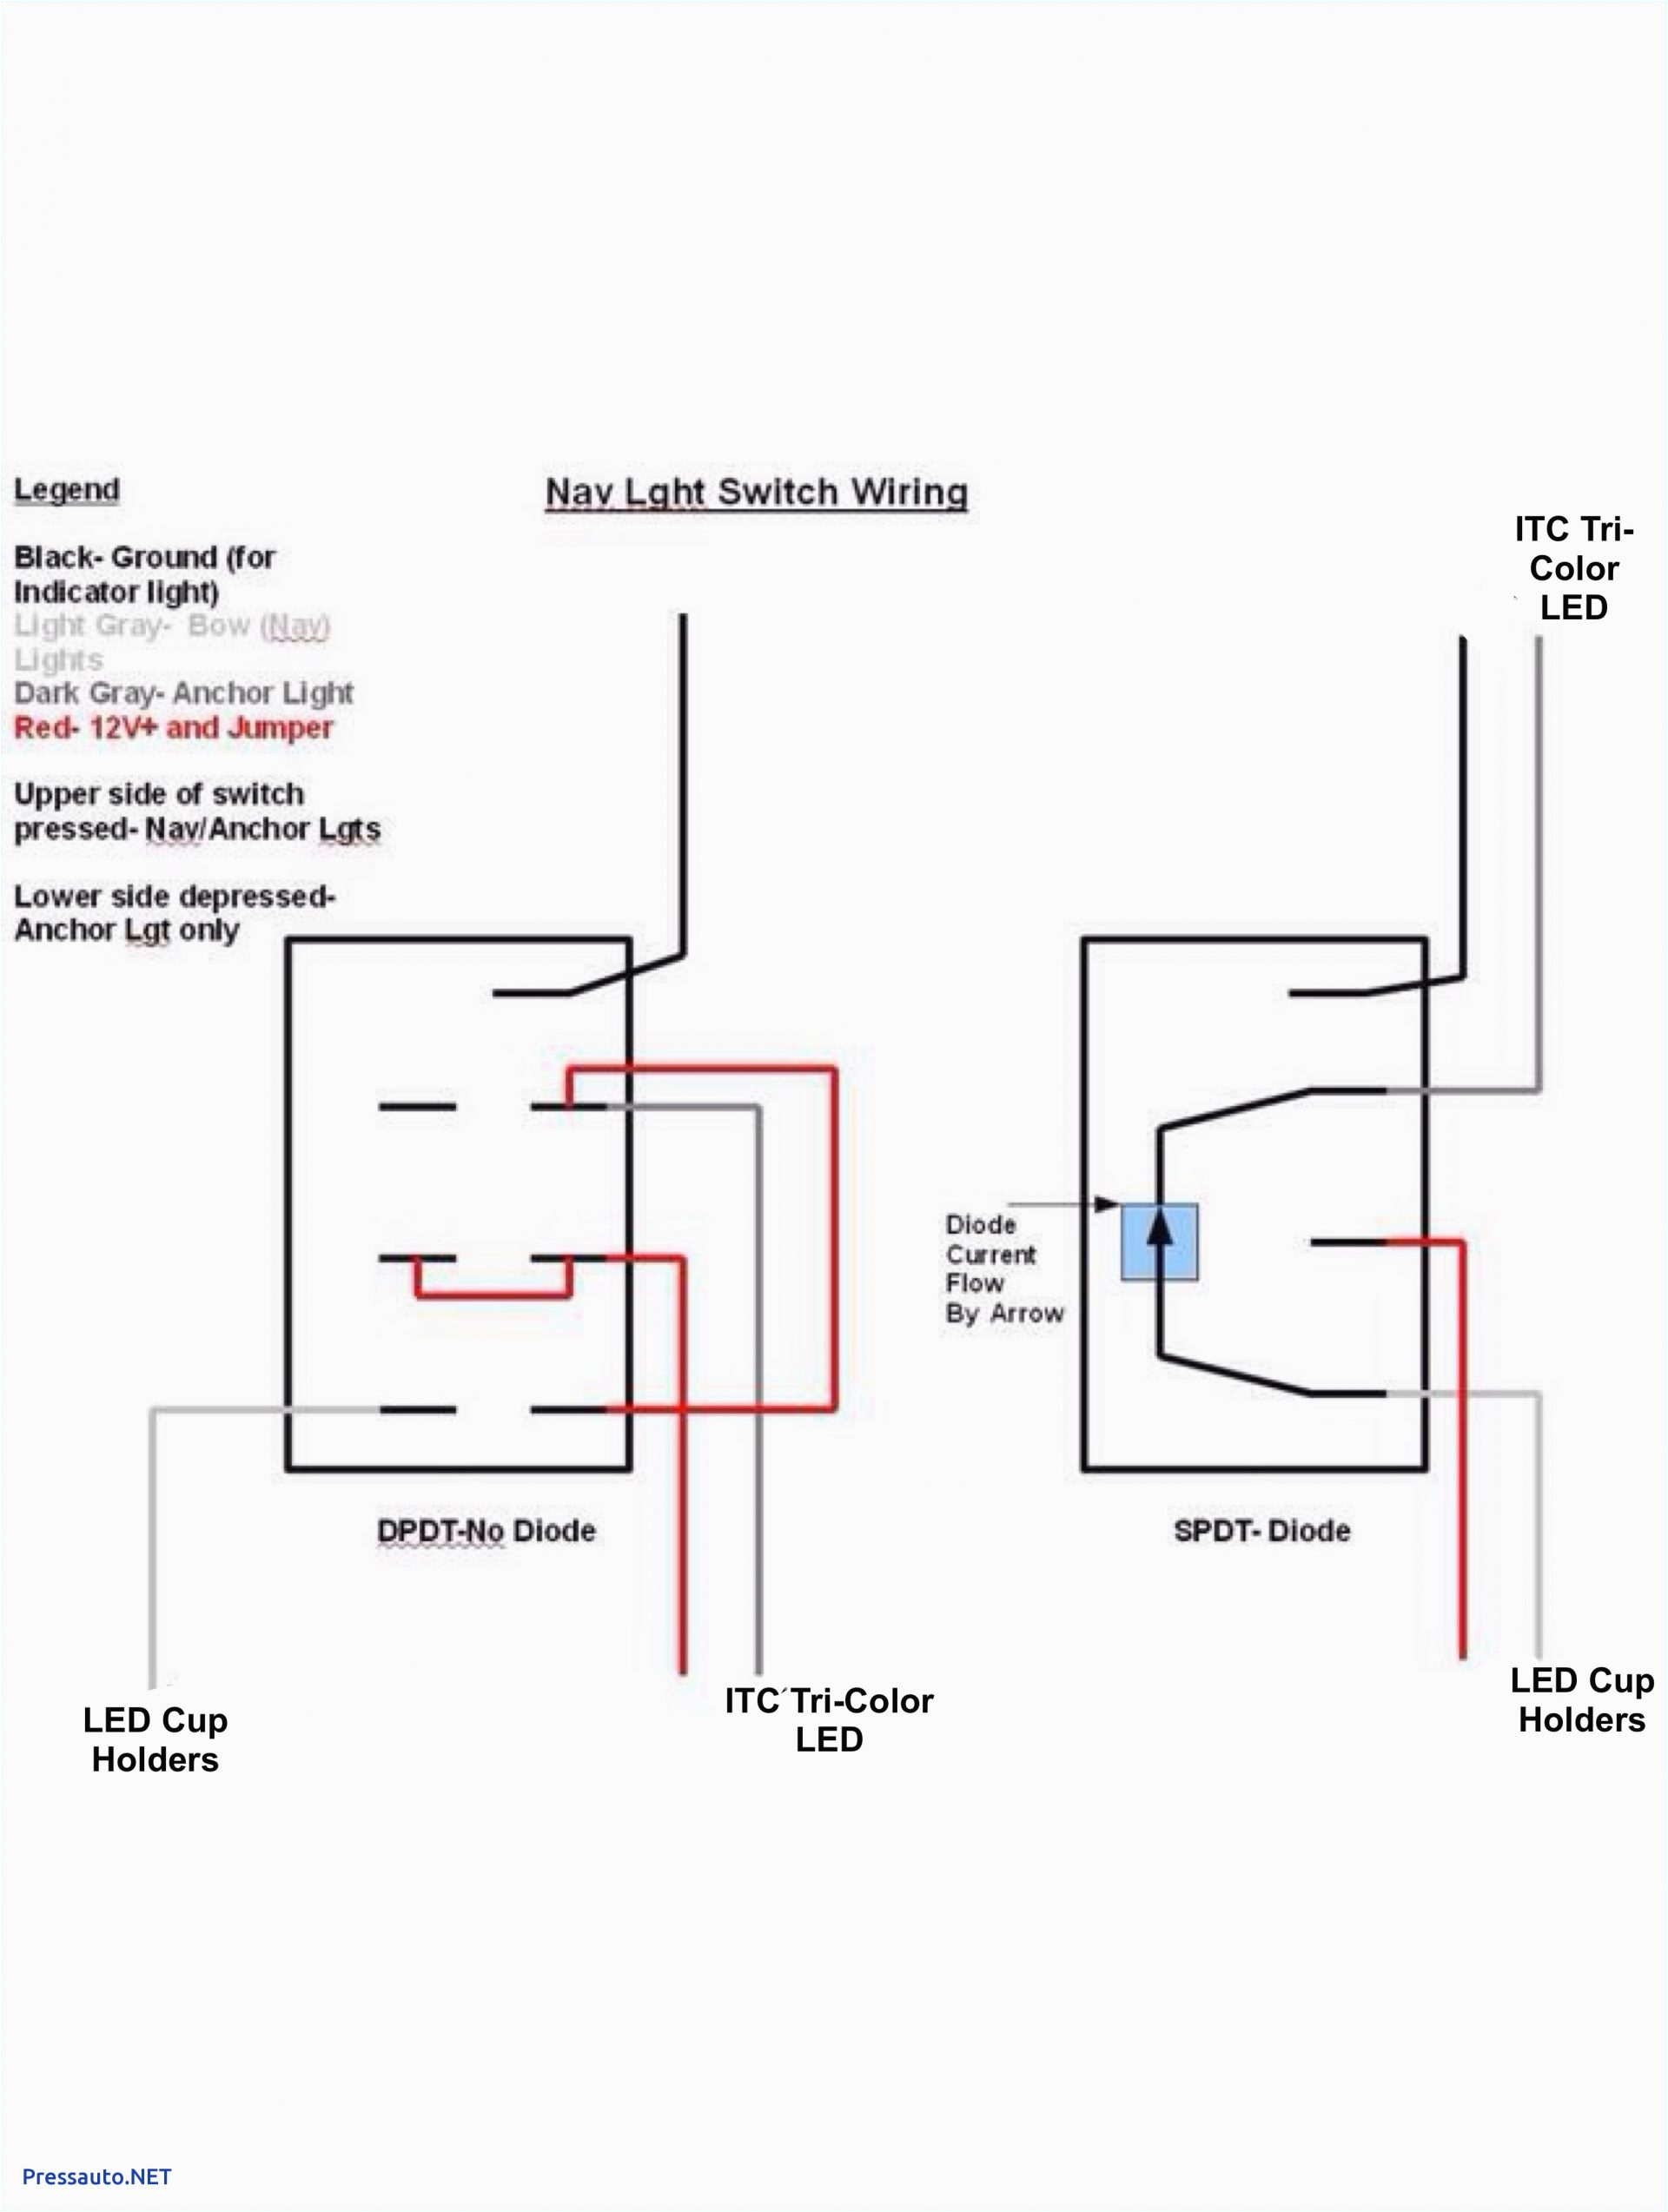 120v electrical light wiring diagrams wiring diagrams 120v light switch wiring diagram